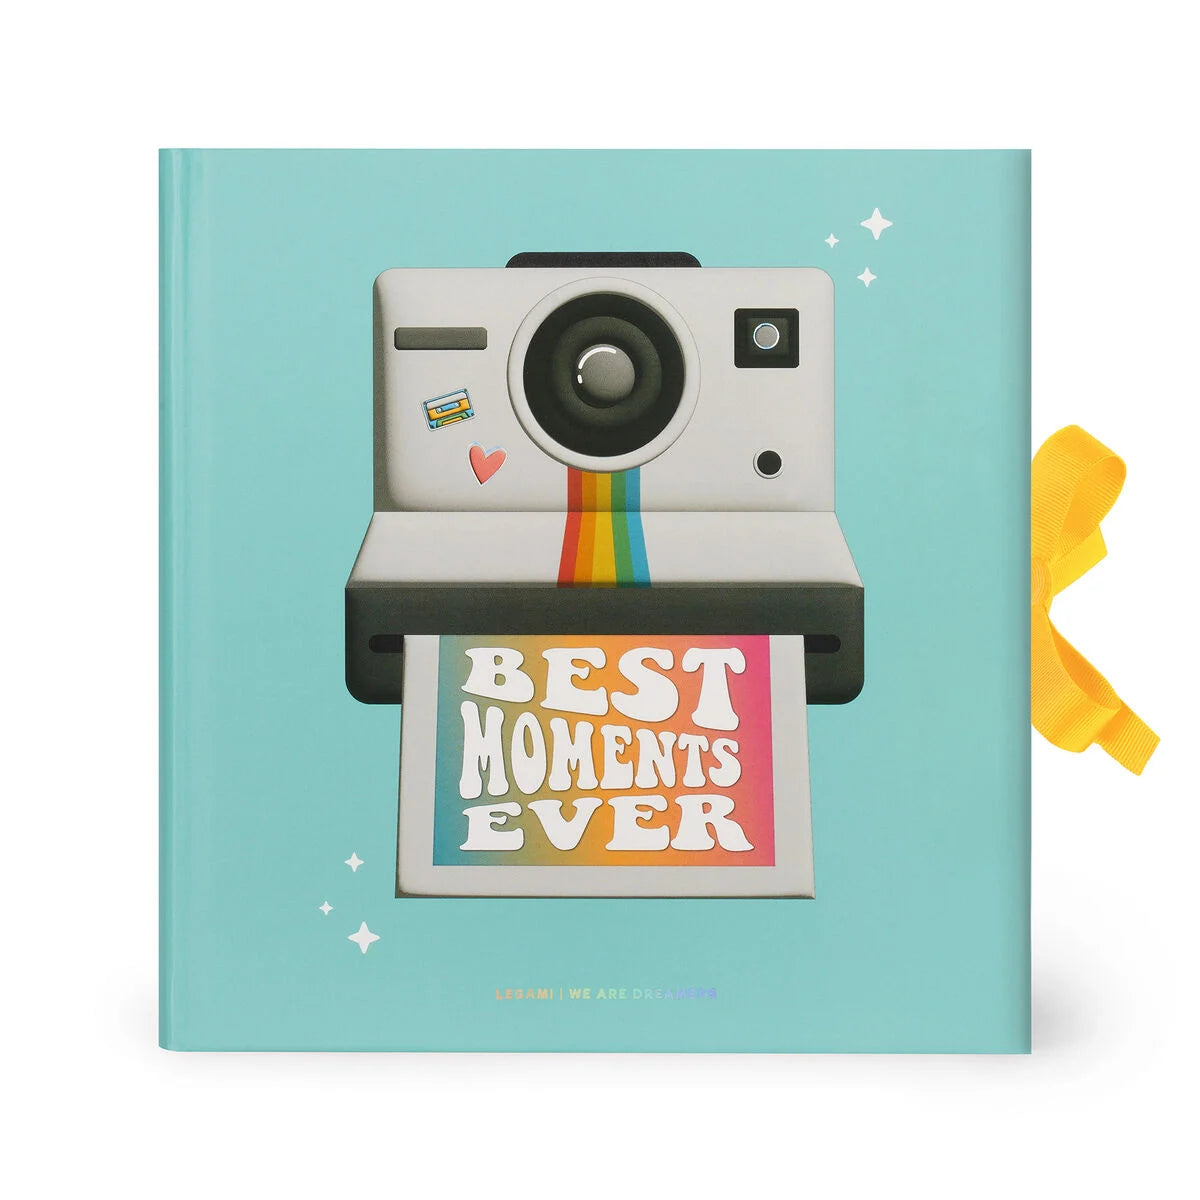 Fabulous Gifts  Quirky Gifts Legami Photo Album Camera by Weirs of Baggot Street